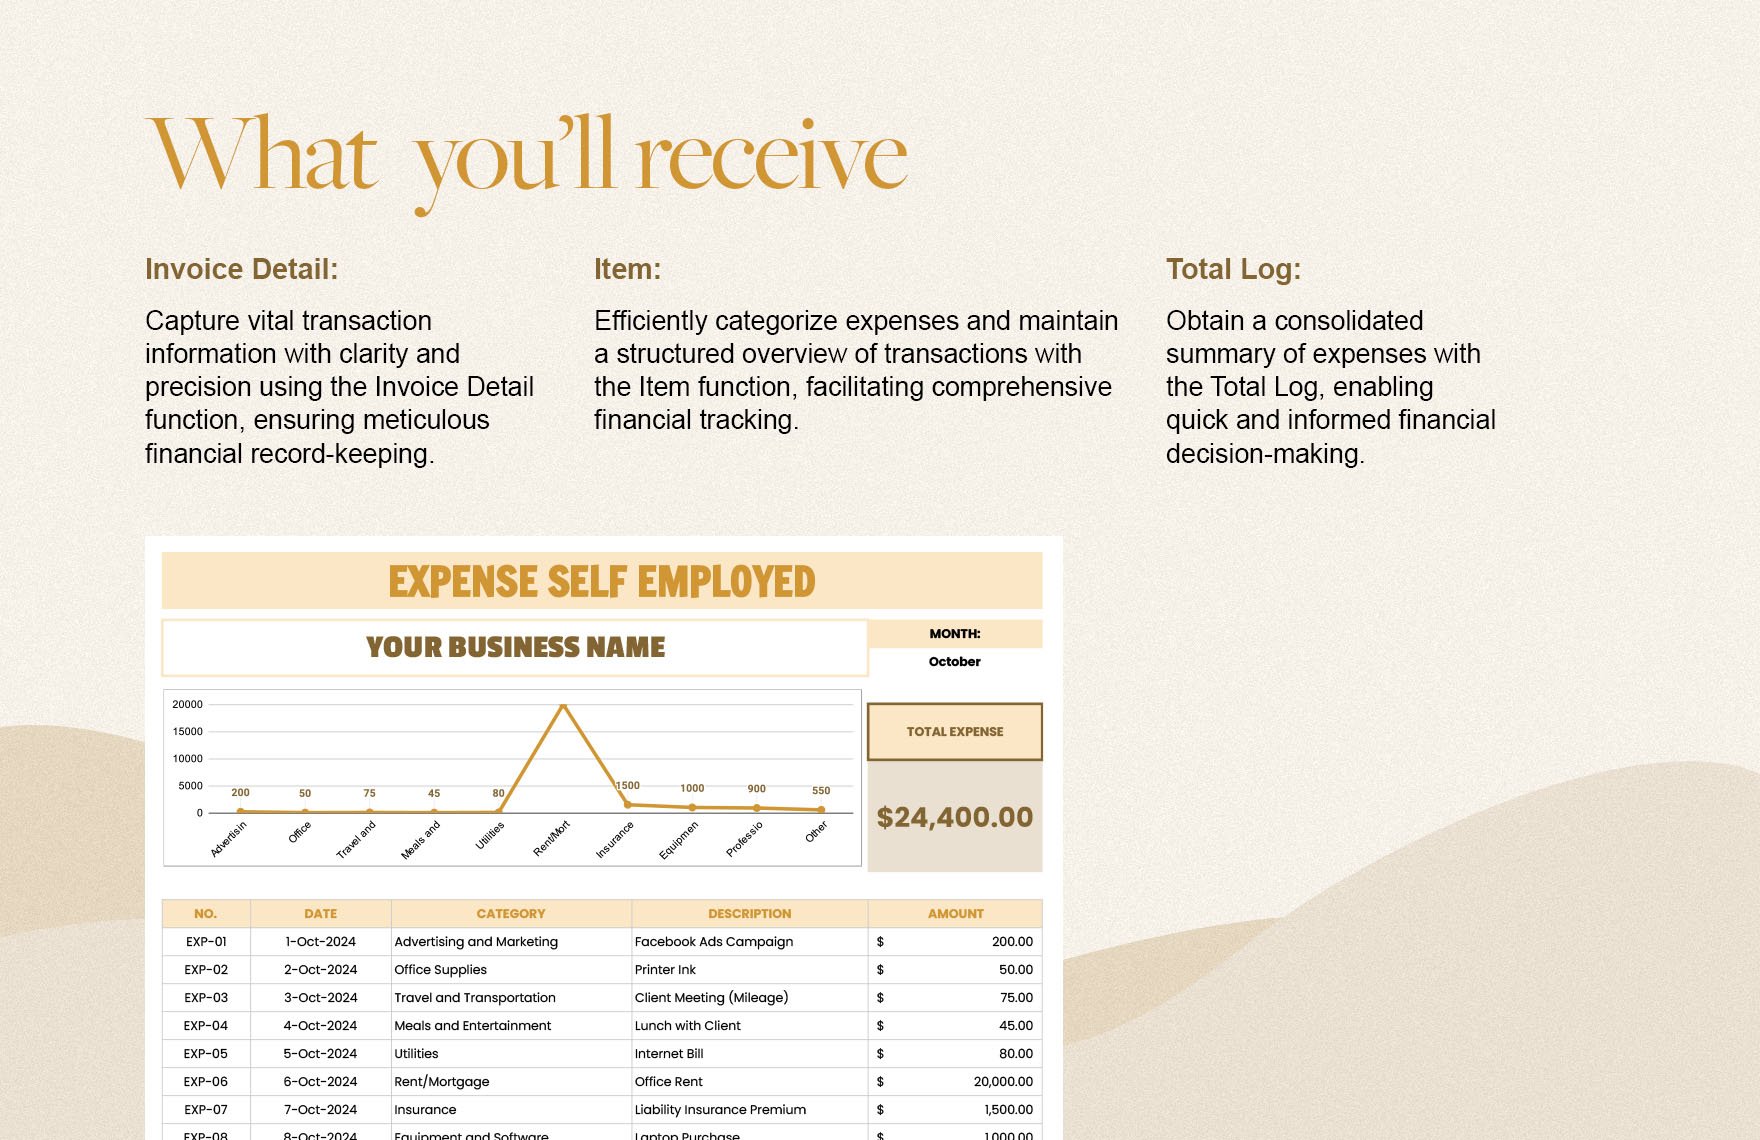 Expense Self Employed Template